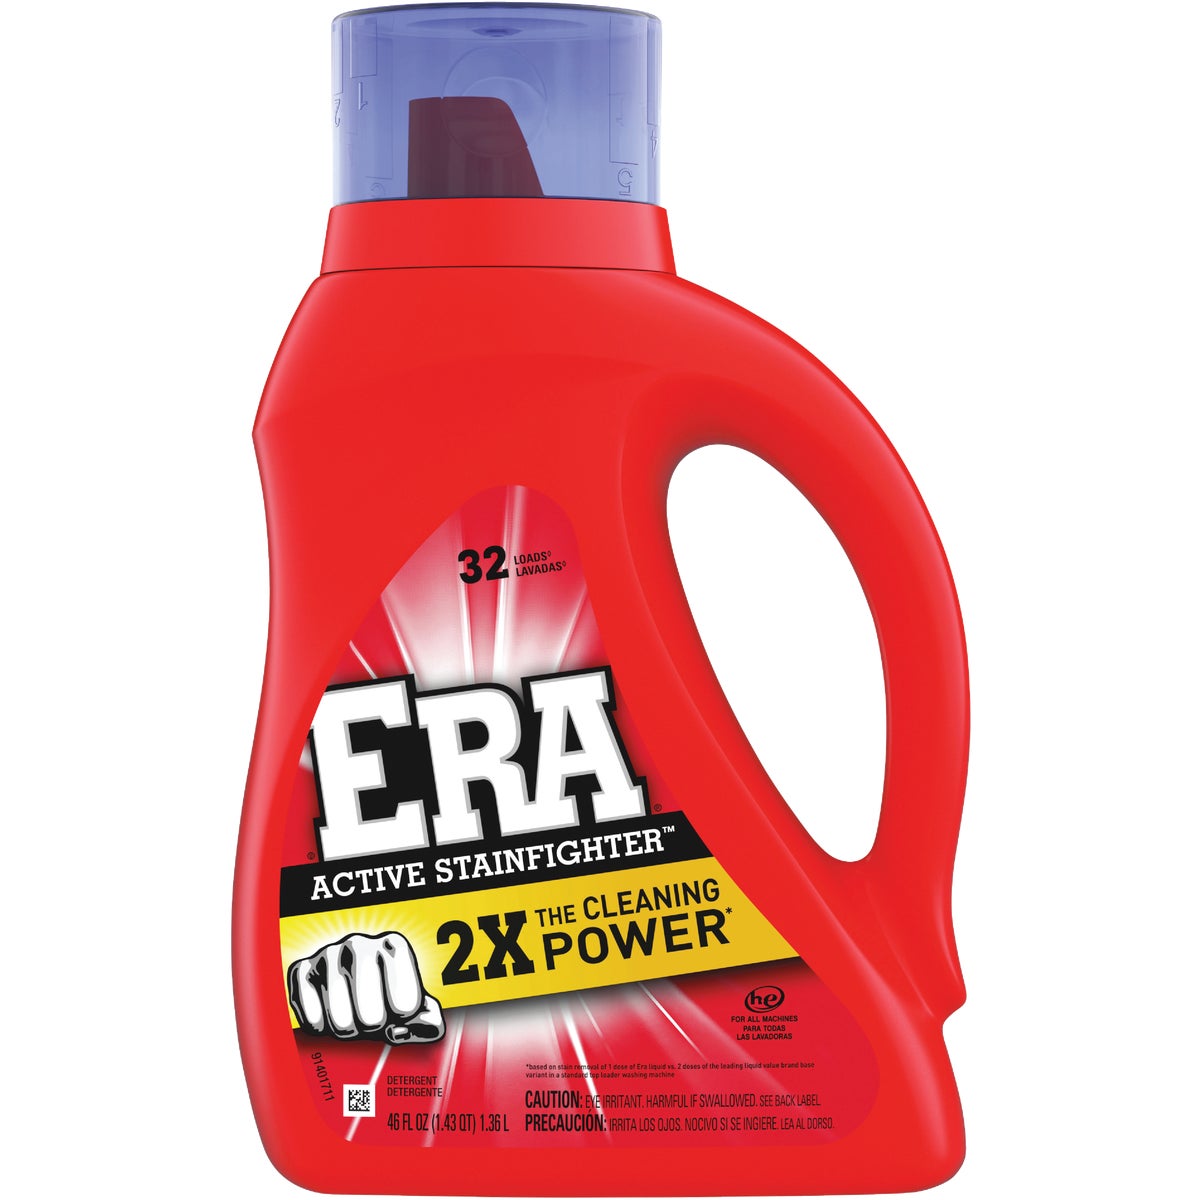 Item 608548, Era regular liquid laundry detergent is 2 times compacted concentrate with 